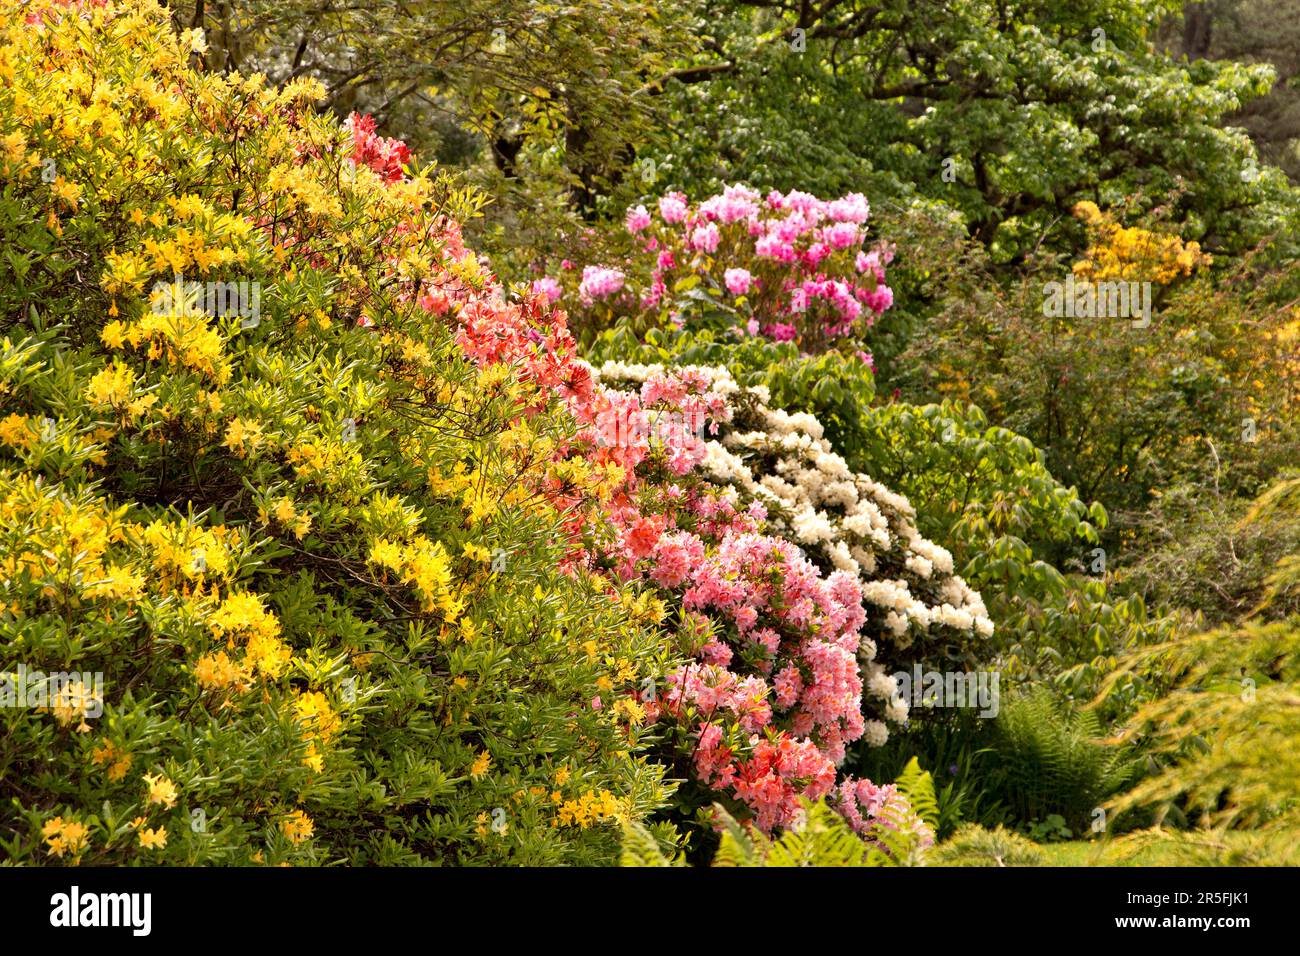 Attadale Gardens Wester Ross Scotland the gardens with yellow Azalea flowers and pink and white Rhododendron flowers Stock Photo